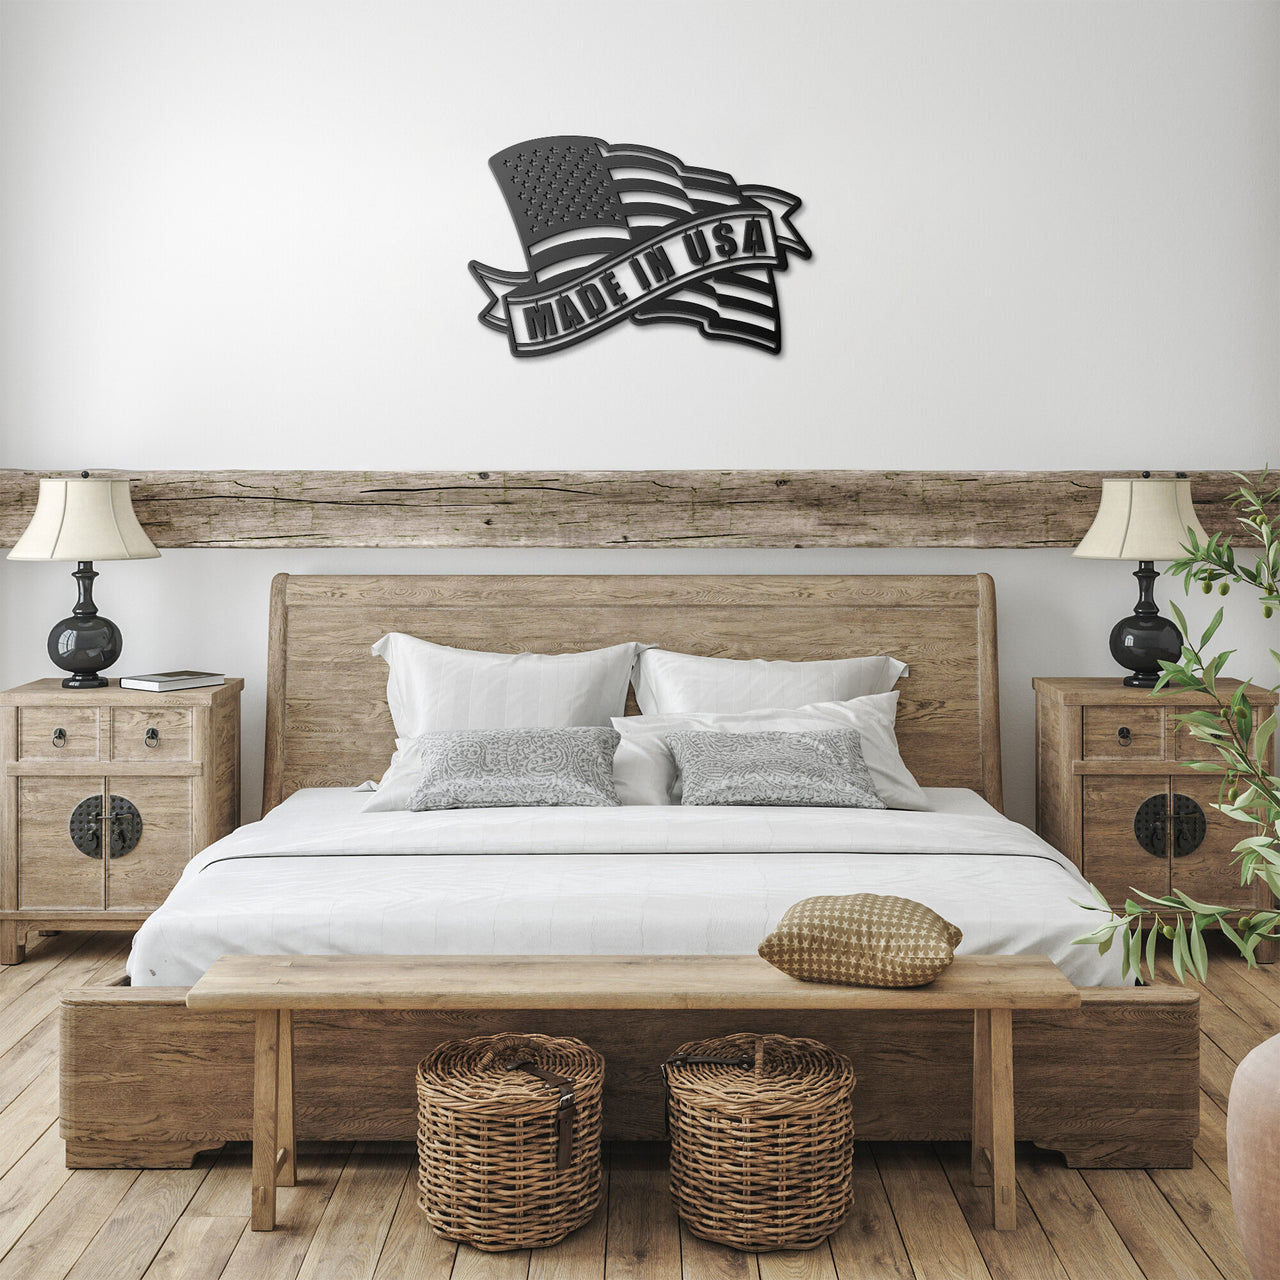 Bed room, Wall Art of Flag with banner, Made in USA. Made of steel and powder coated.